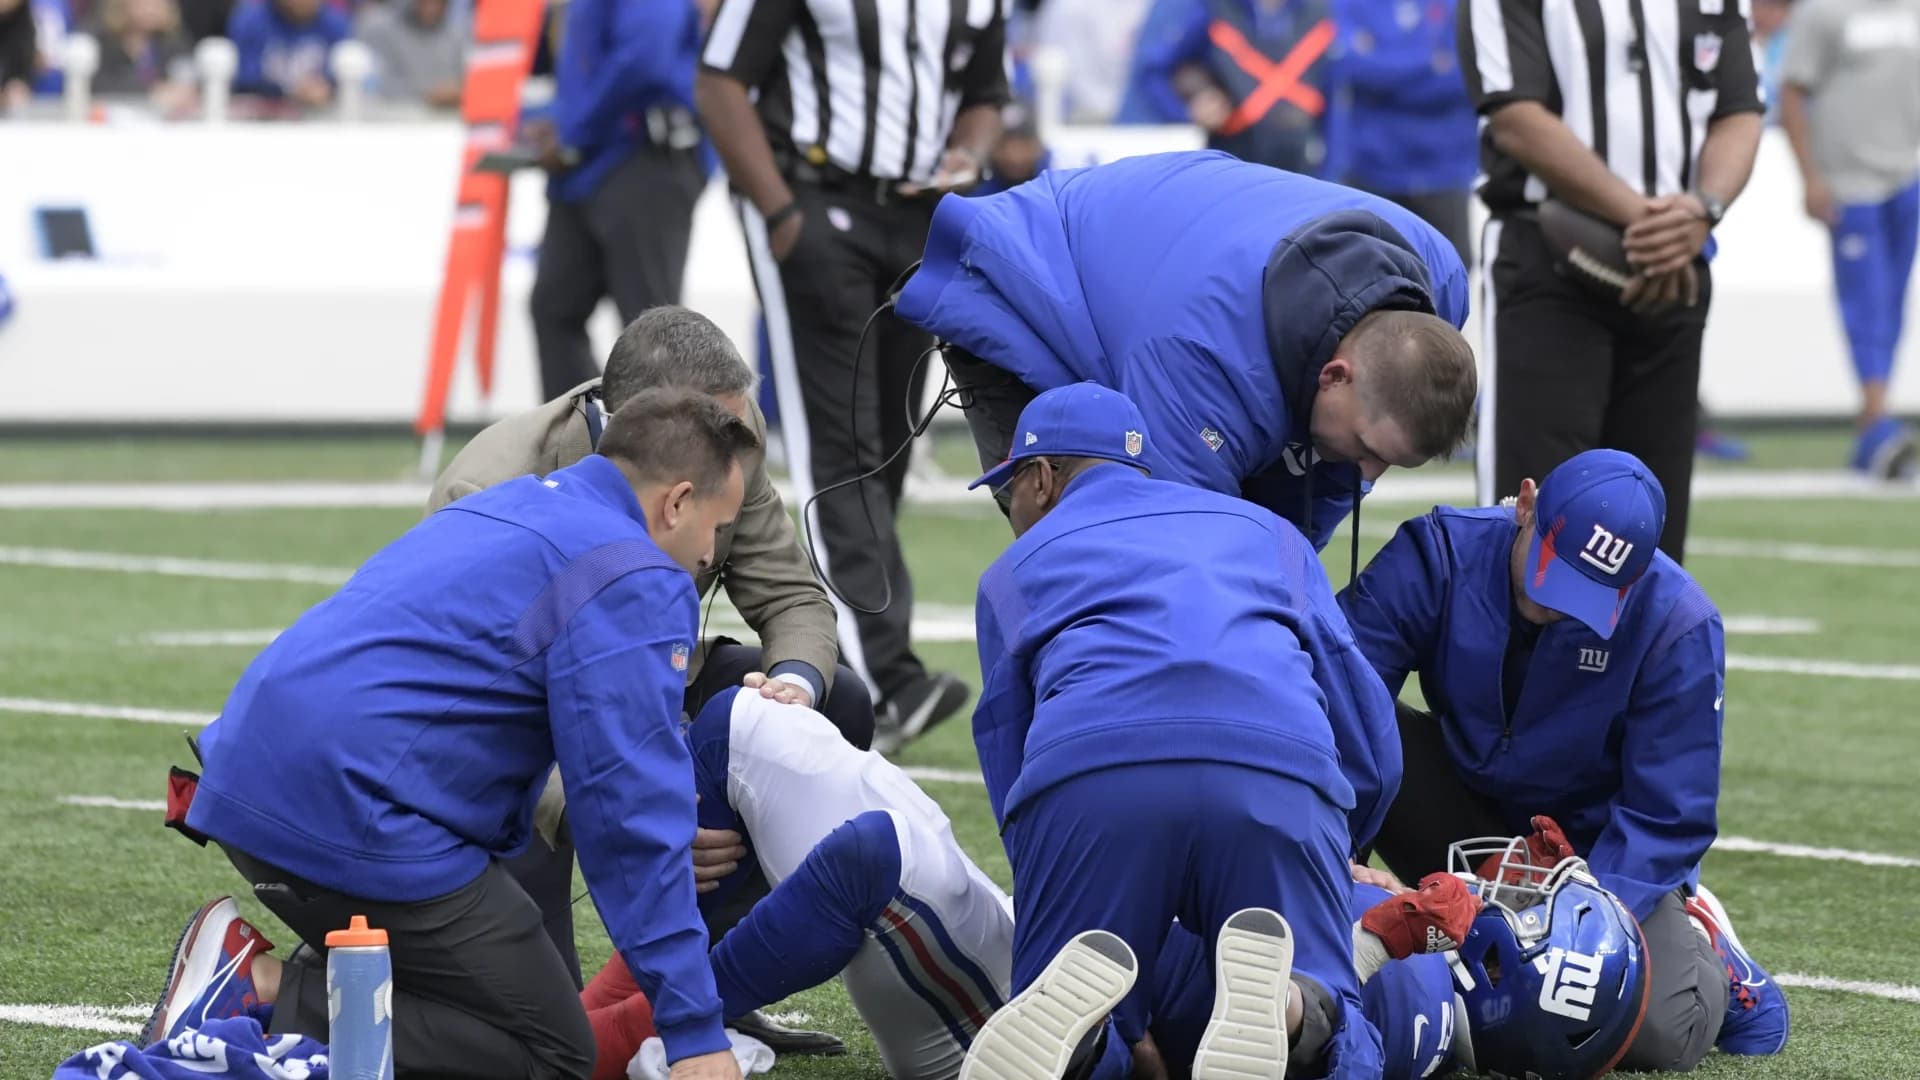 Giants place Jabrill Peppers on injured reserve with ACL injury